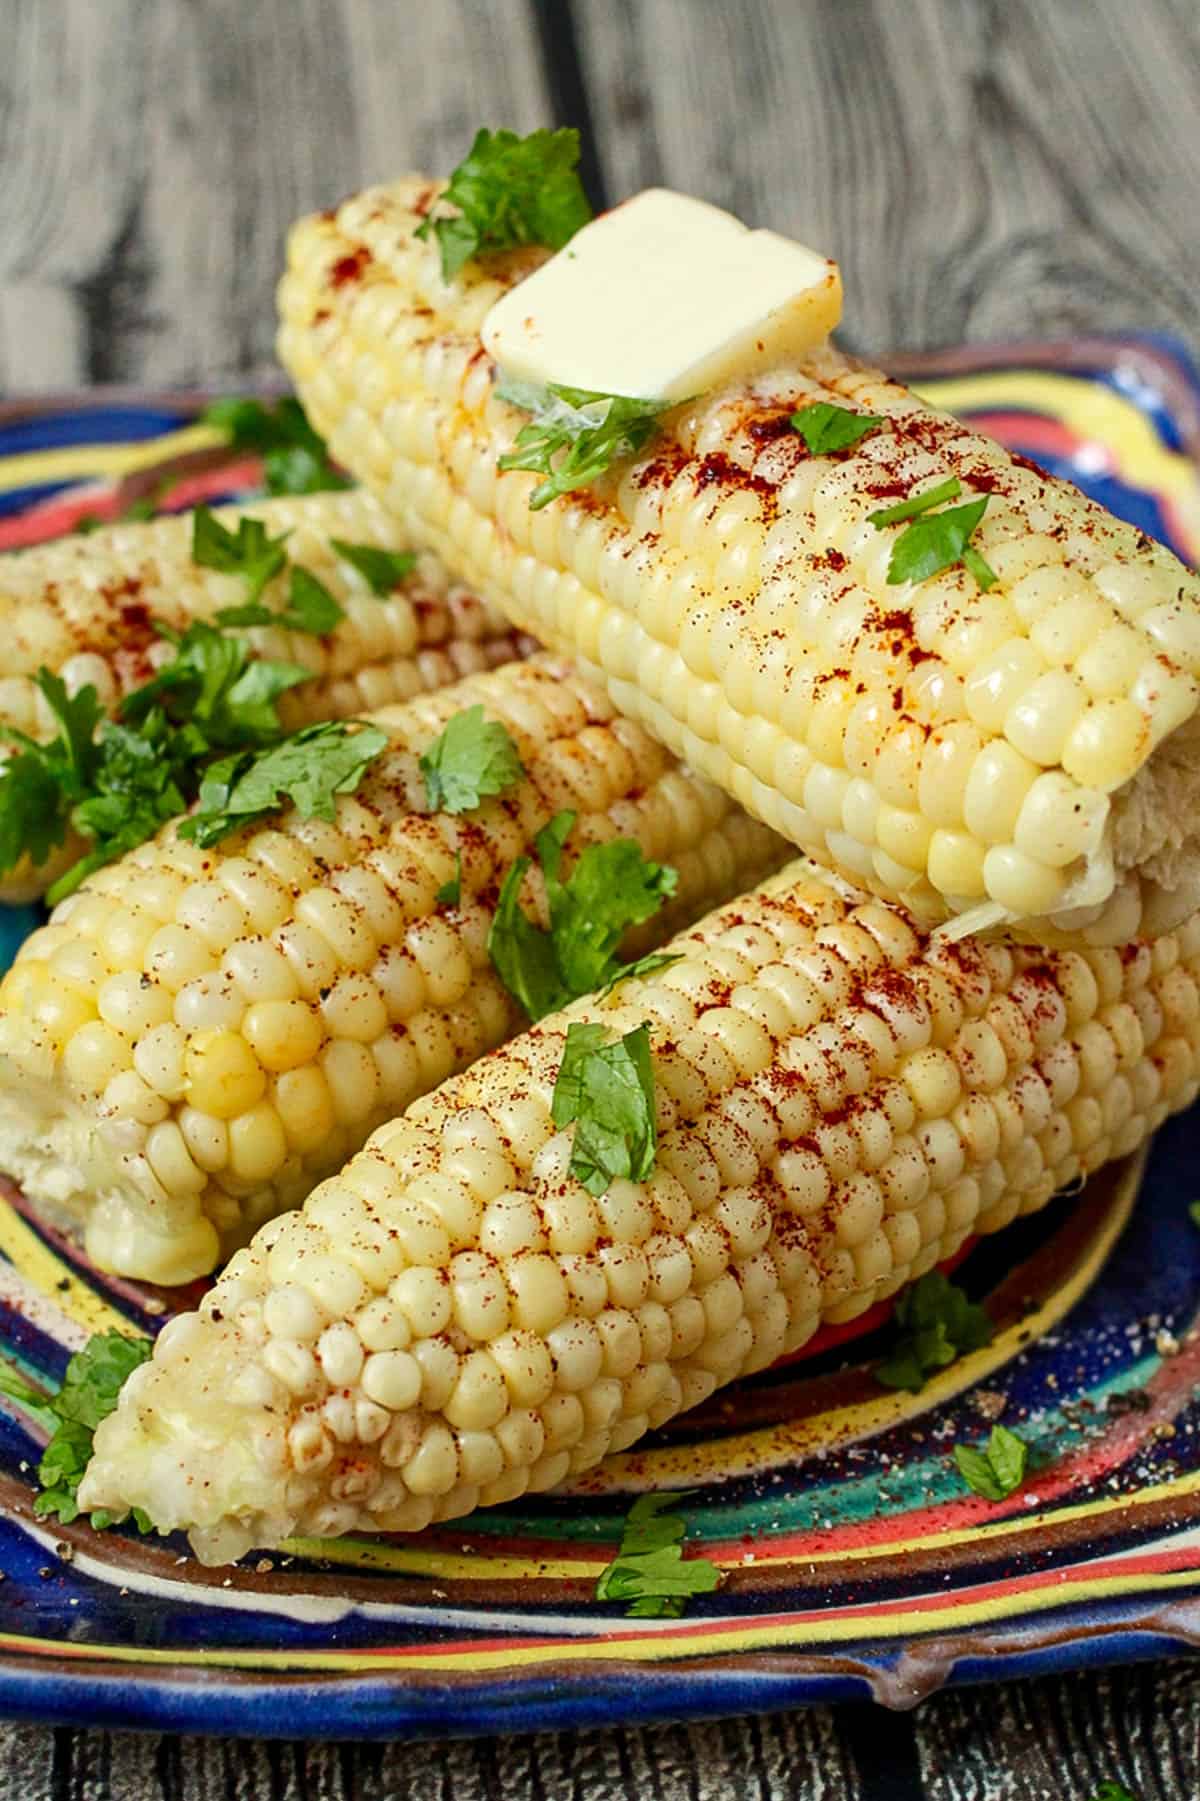 Four ears of corn stacked on a colorful plate with parsley and chili powder sprinkled over them.